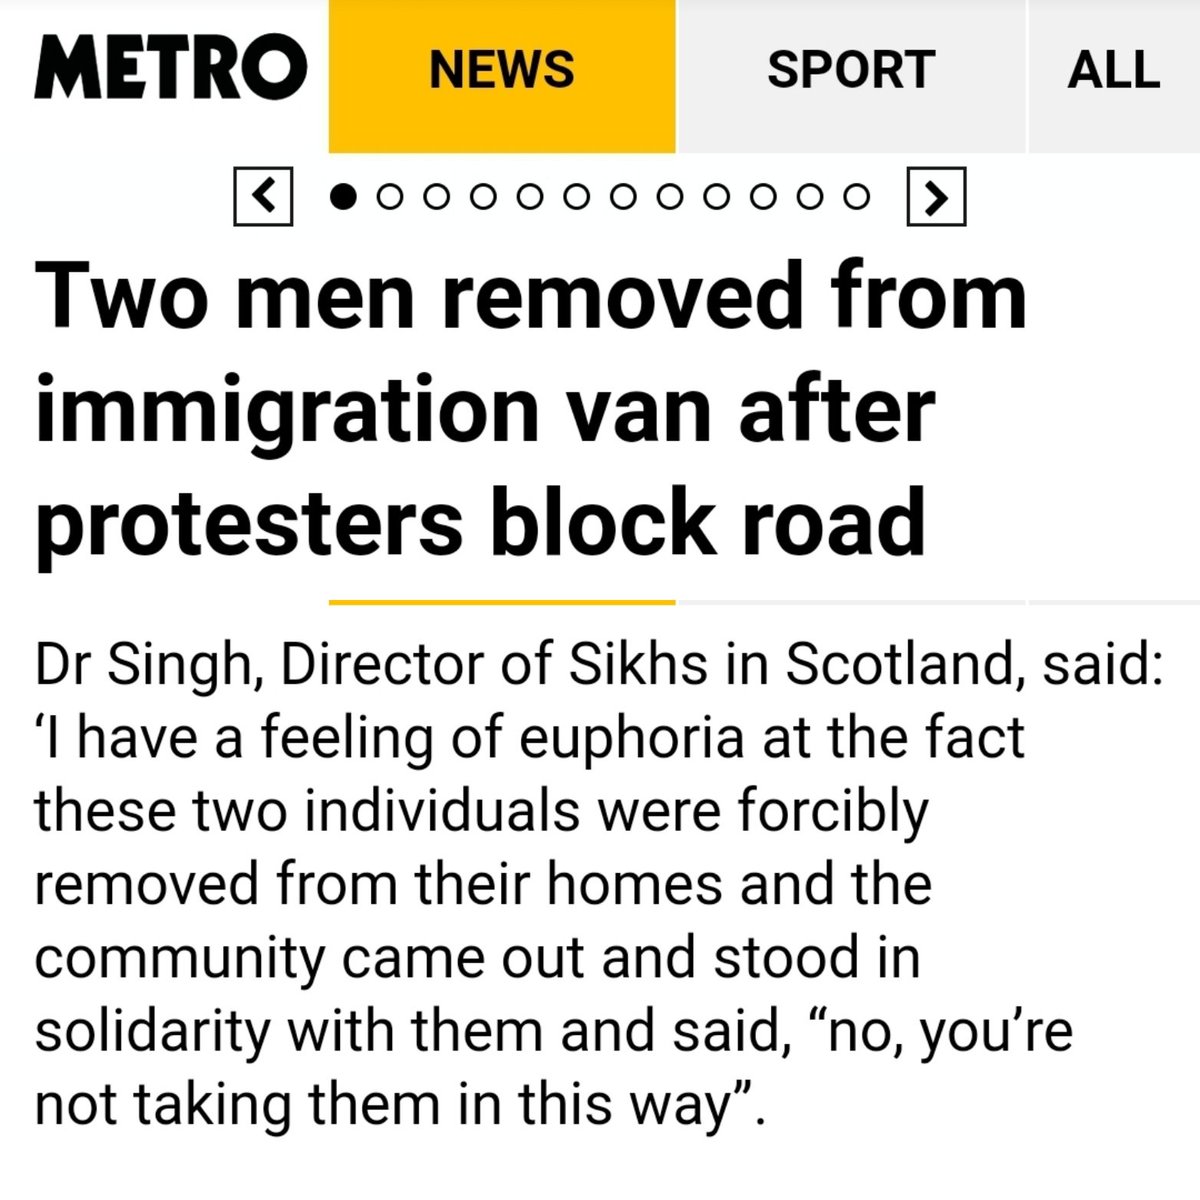 Speaking to @metrouk, @DrSharandeep said: 'The community came out & stood in solidarity with the men and we all said, NO, you’re not taking them. Let them go.' #Pollokshields #KenmureStreet metro.co.uk/2021/05/13/che…